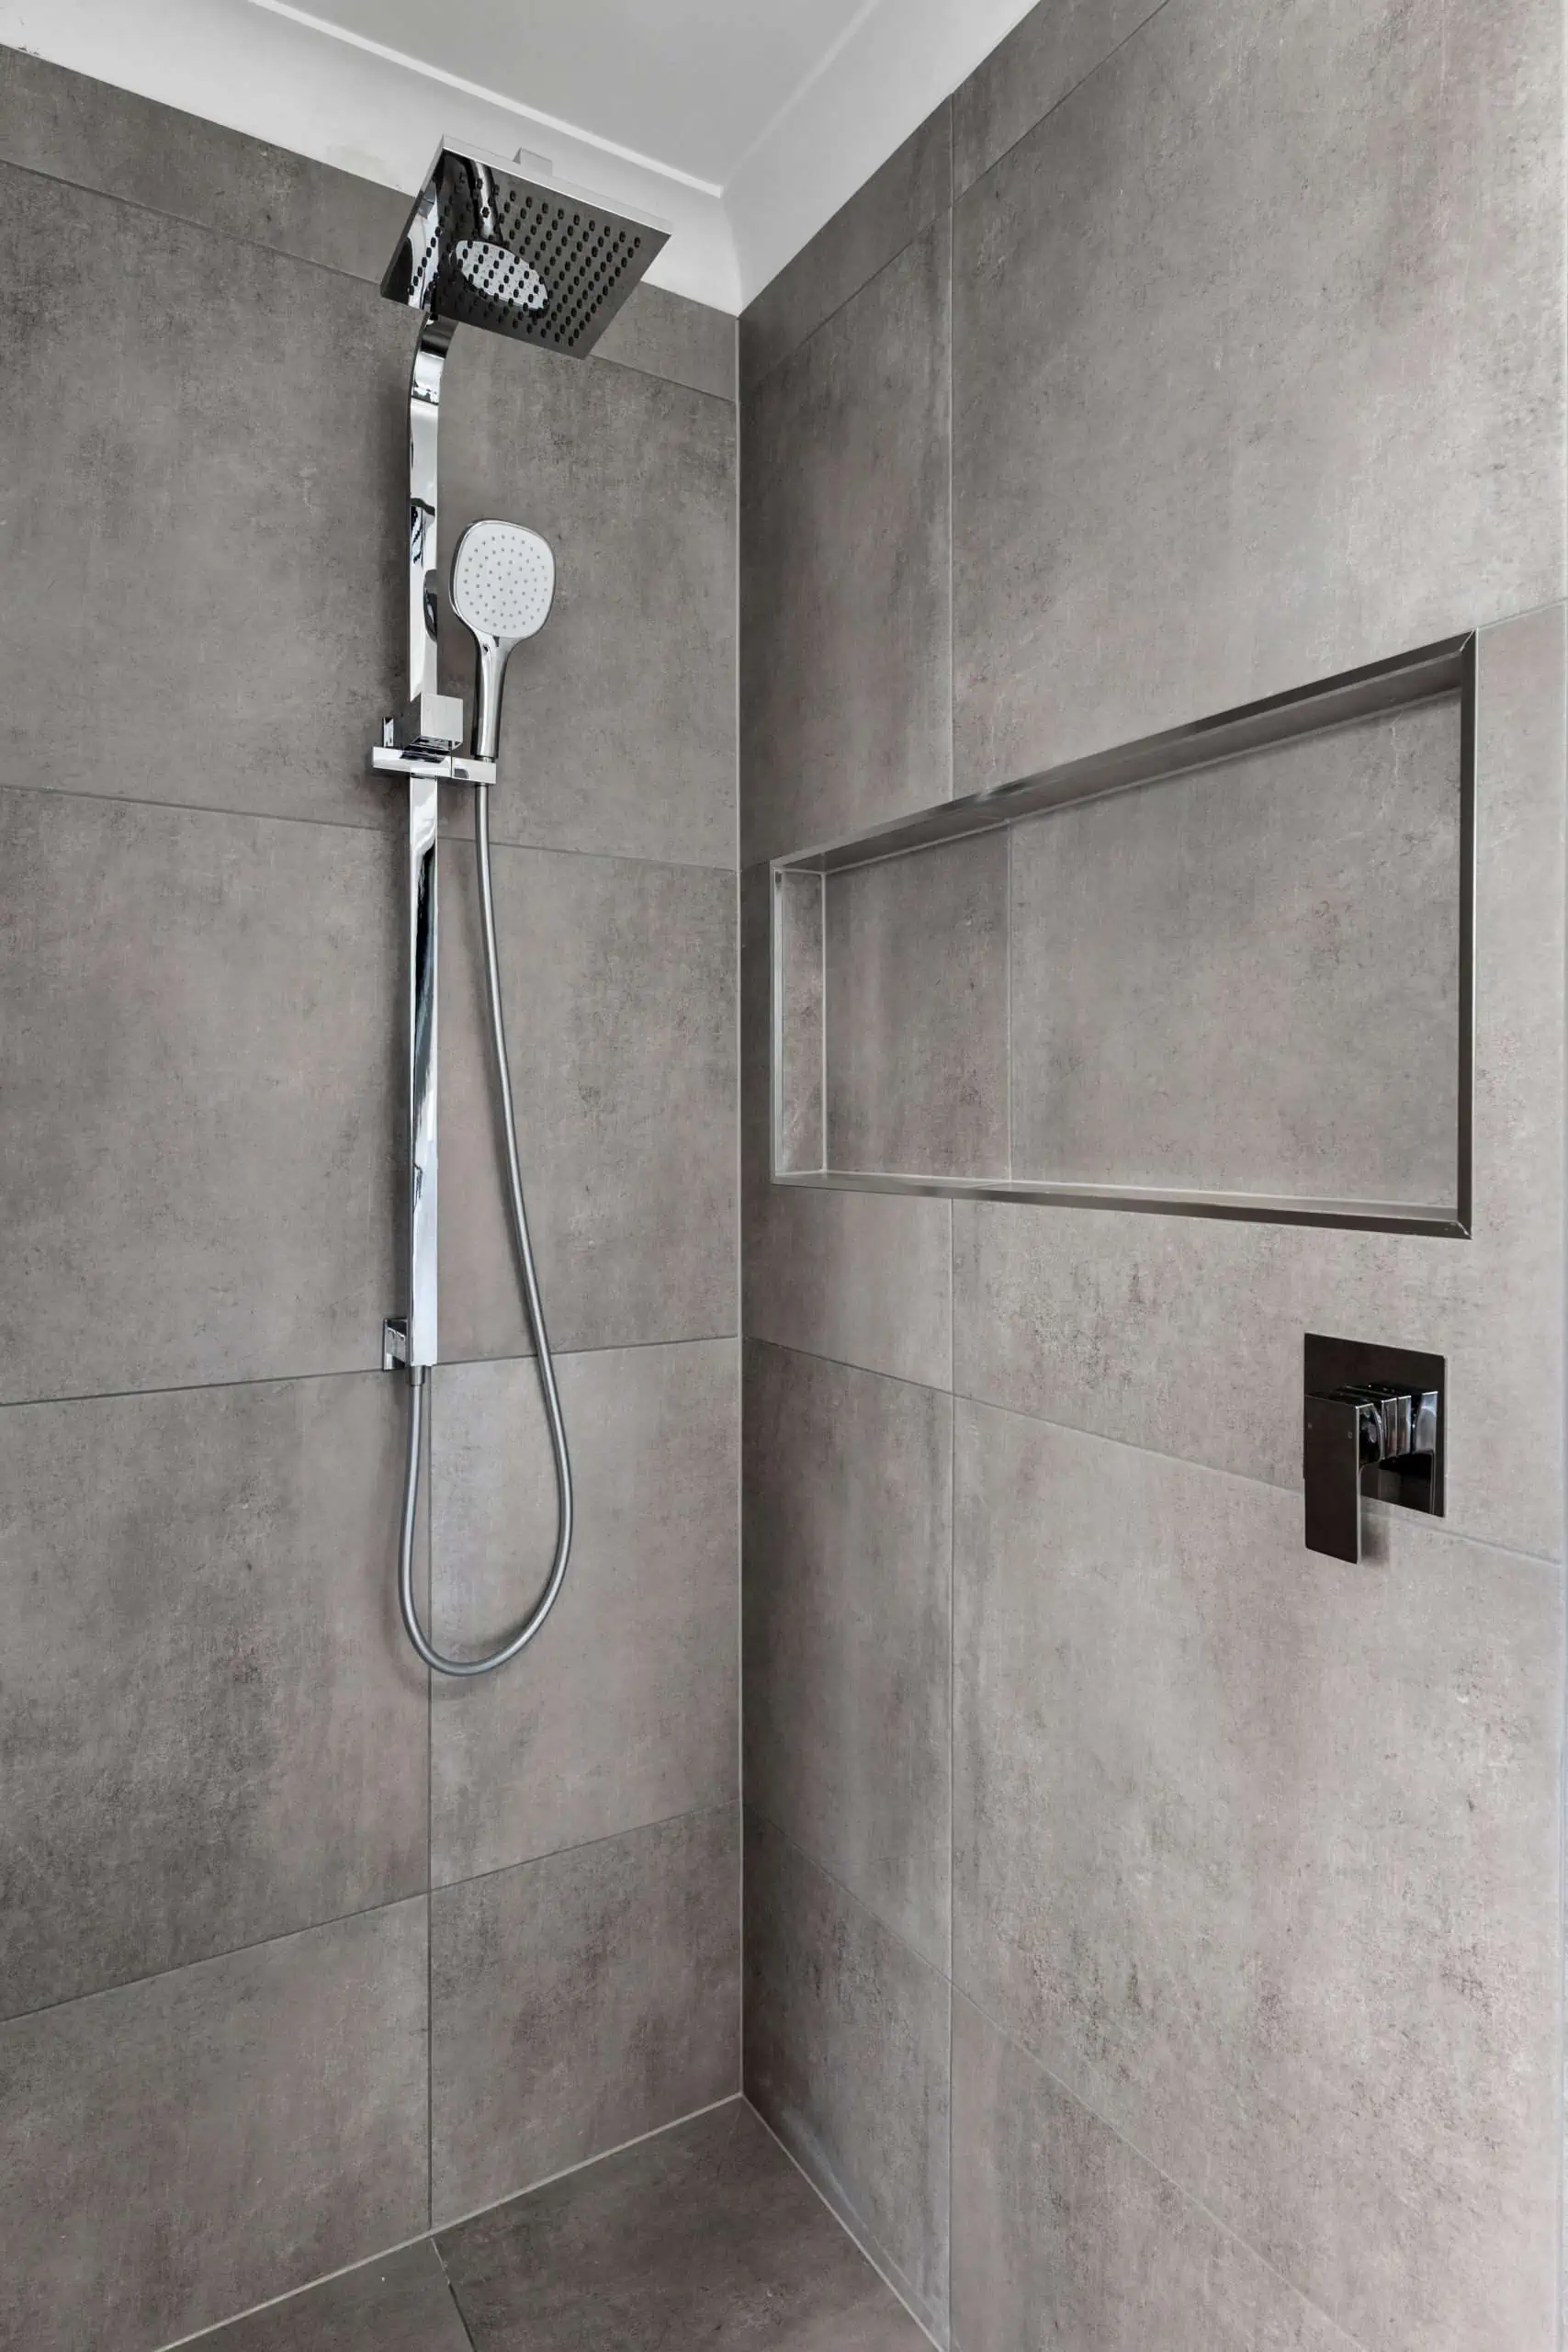 Chrome details in a shower area of a modern bathroom